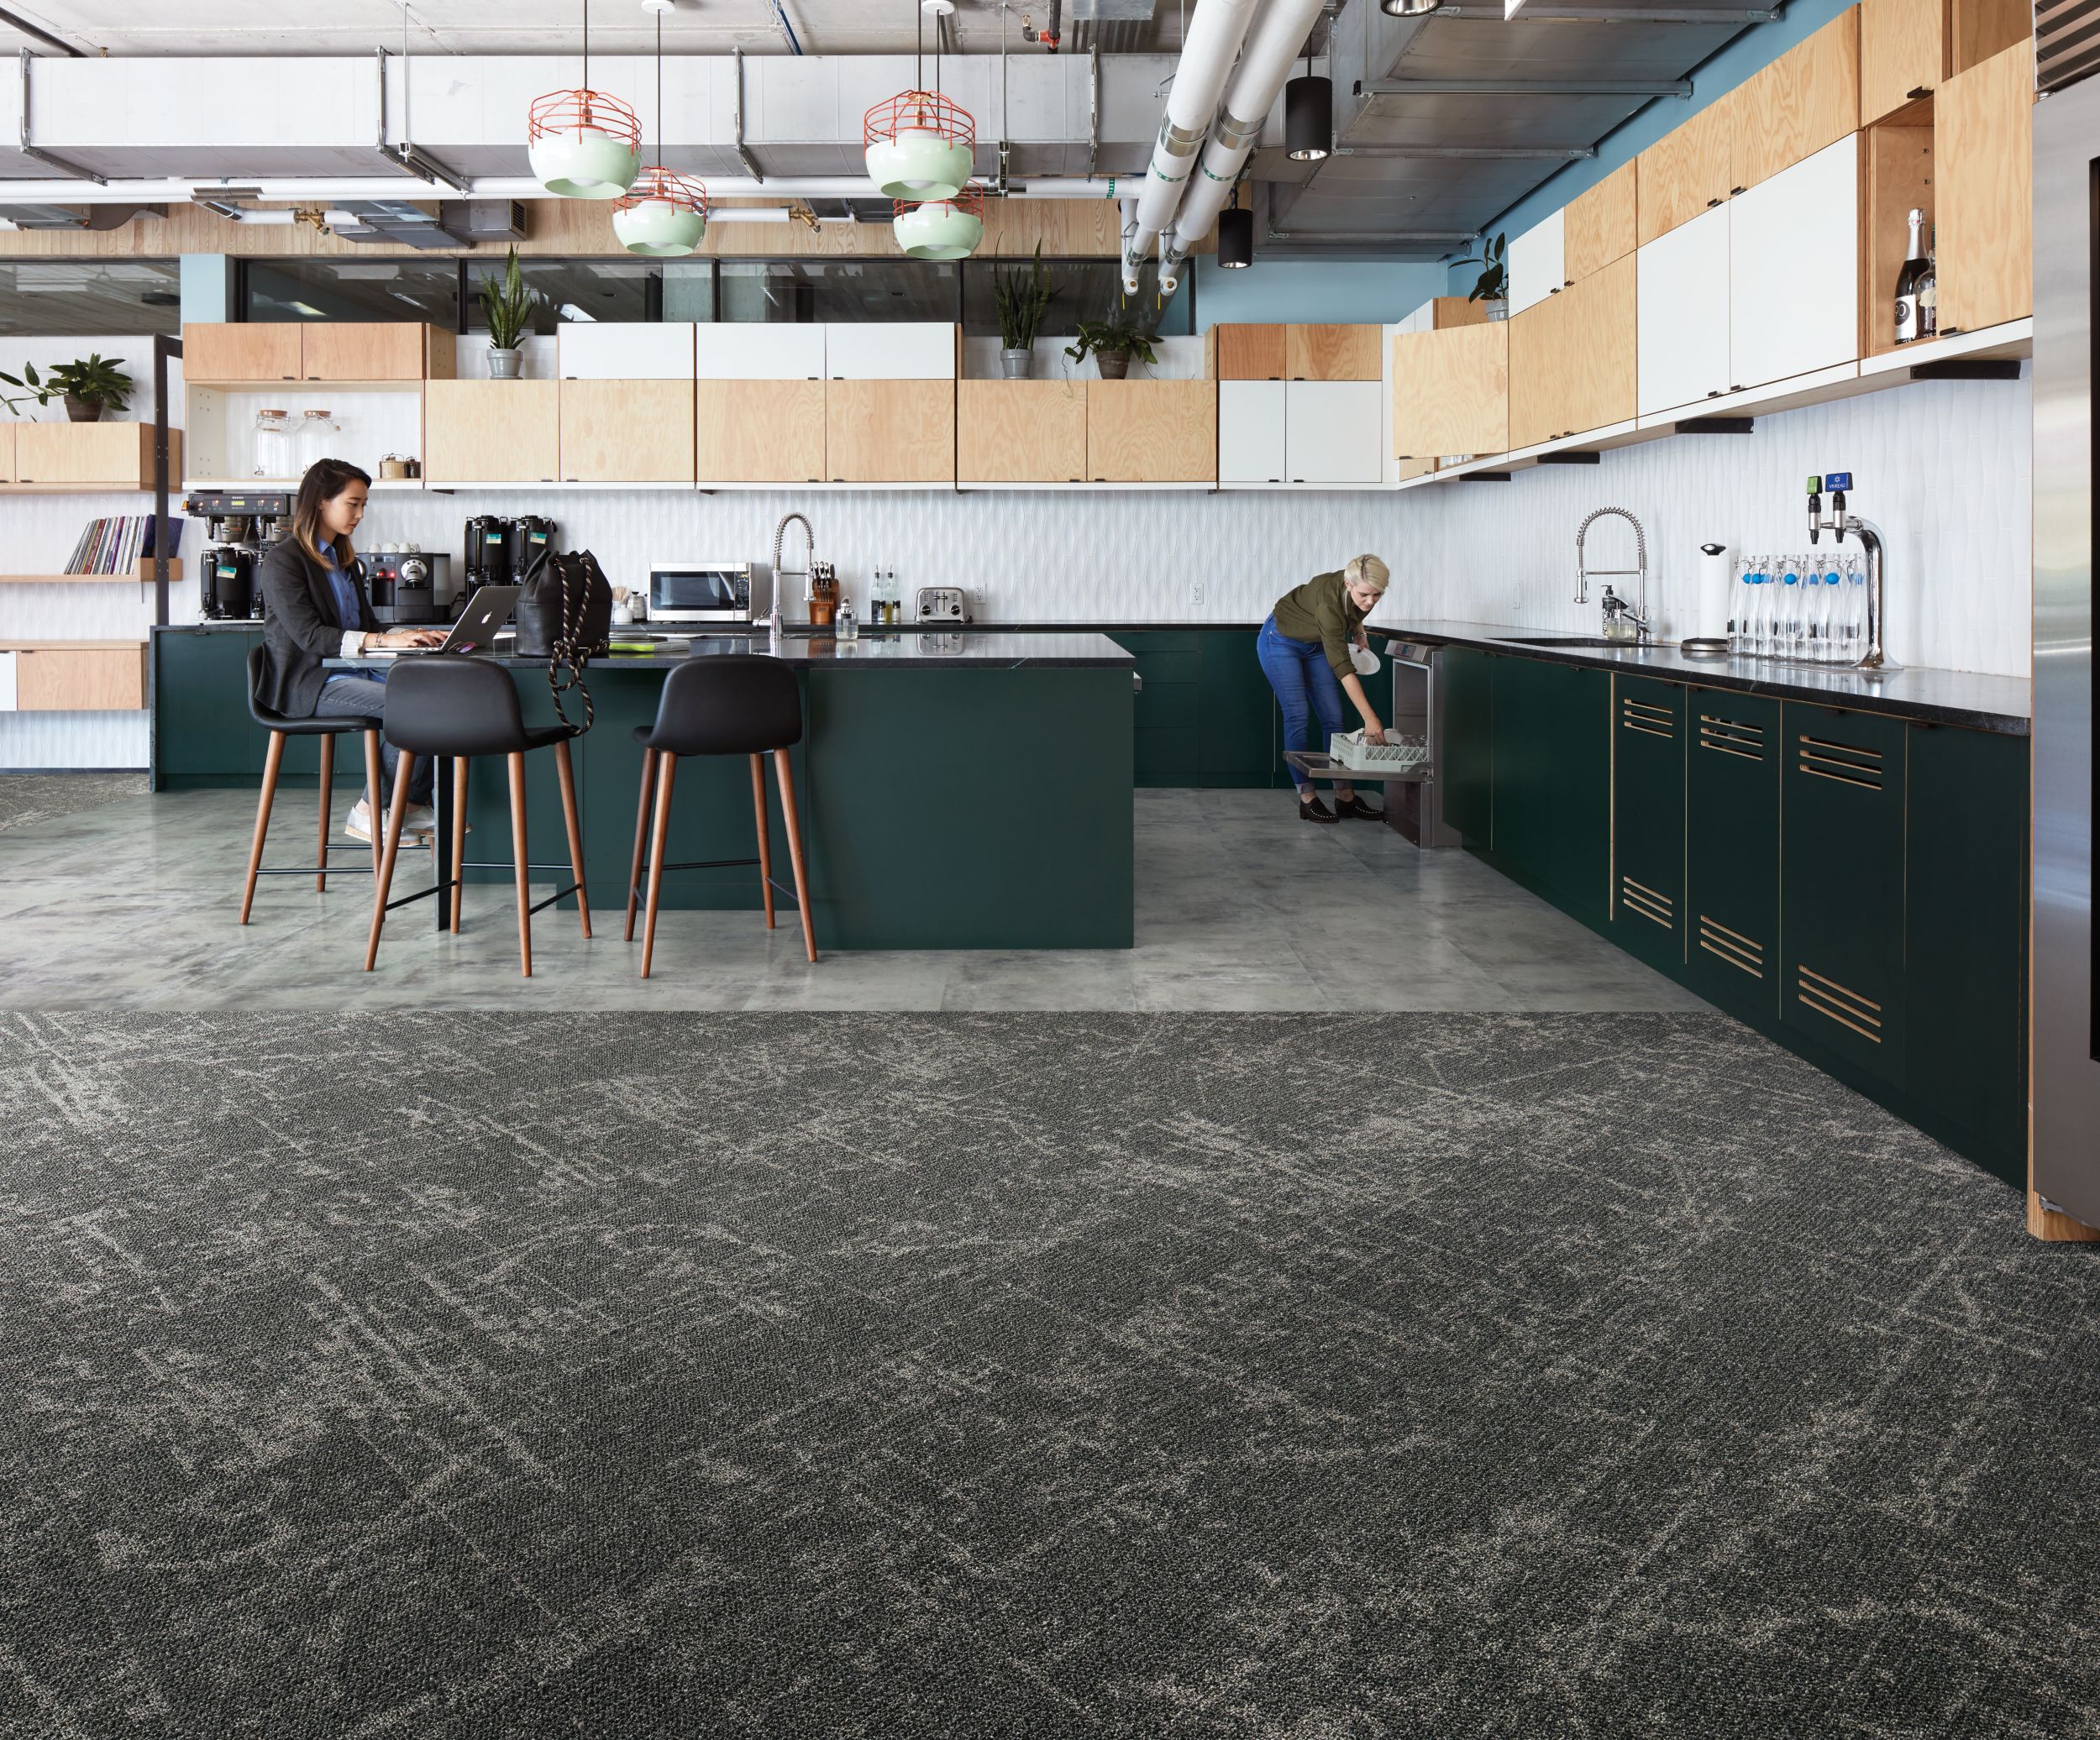 Interface Ice Breaker carpet tile and Textured Stones LVT in kitchen area with women lodaing dish washer and women working on computer numéro d’image 6